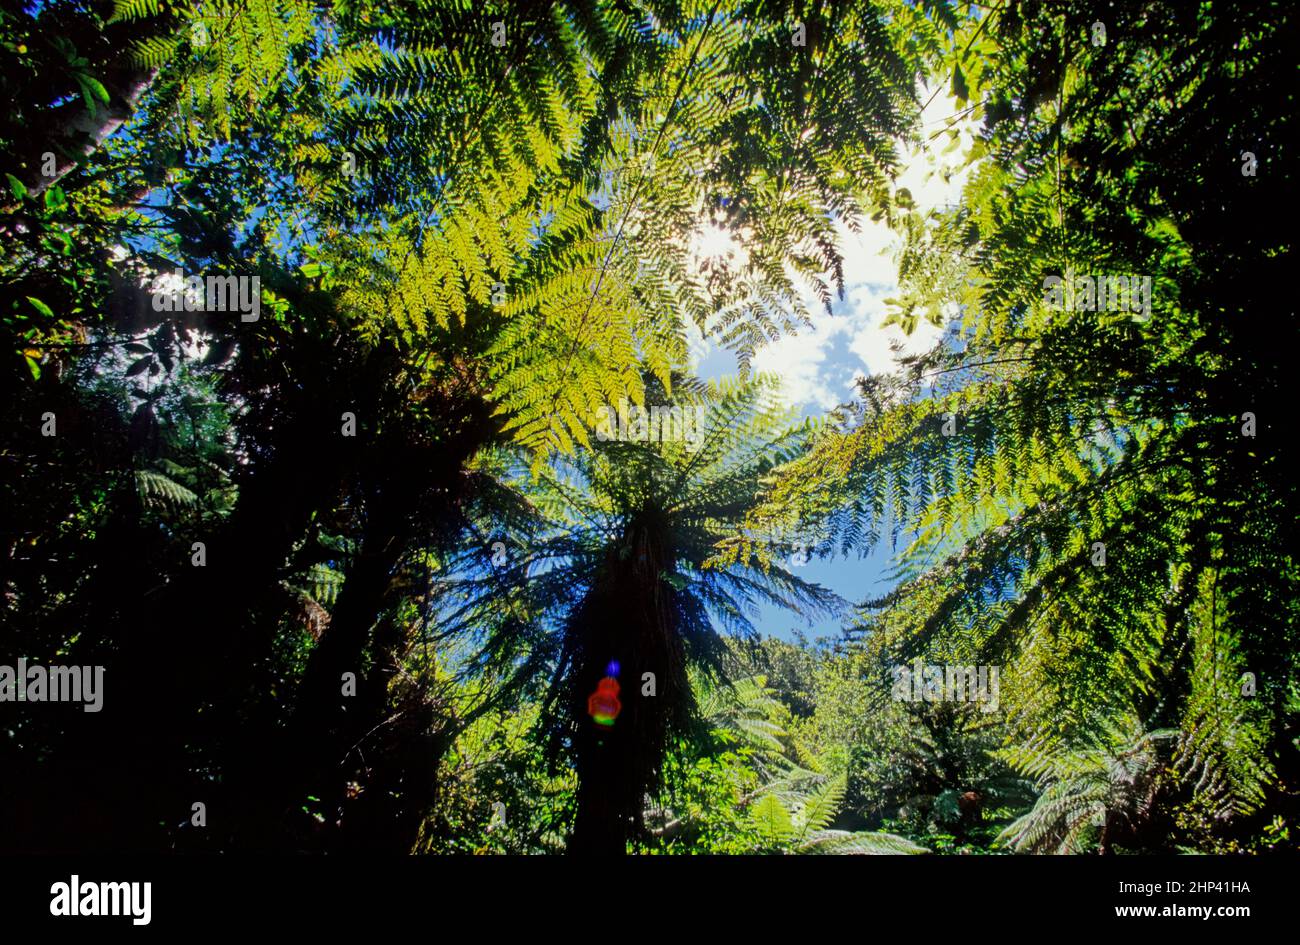 Sphaeropteris medullaris, synonym Cyathea medullaris,commonly known as mamaku or black tree fern, is a large tree fern up to 20 m tall. Stock Photo